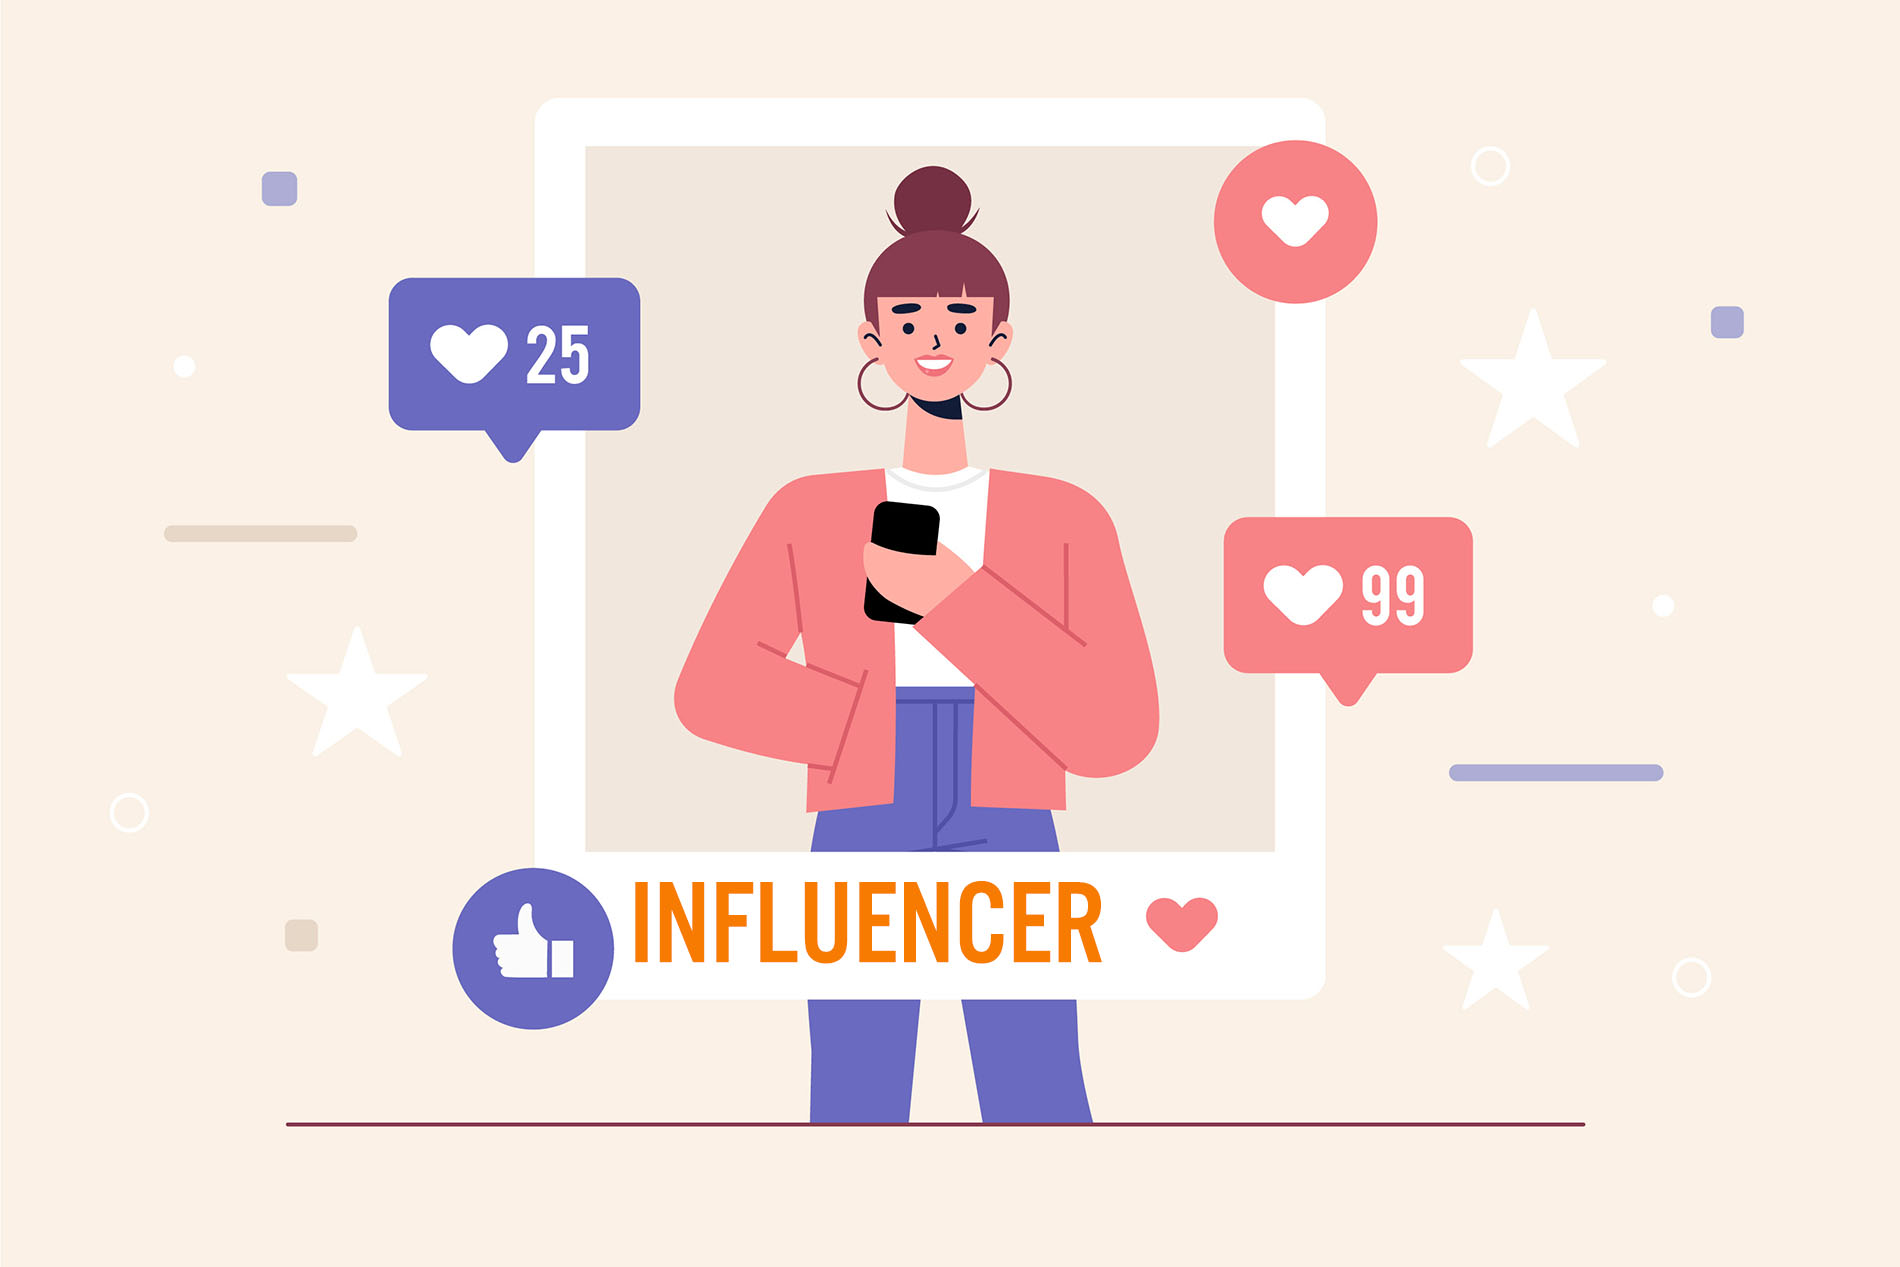 What is an influencer?